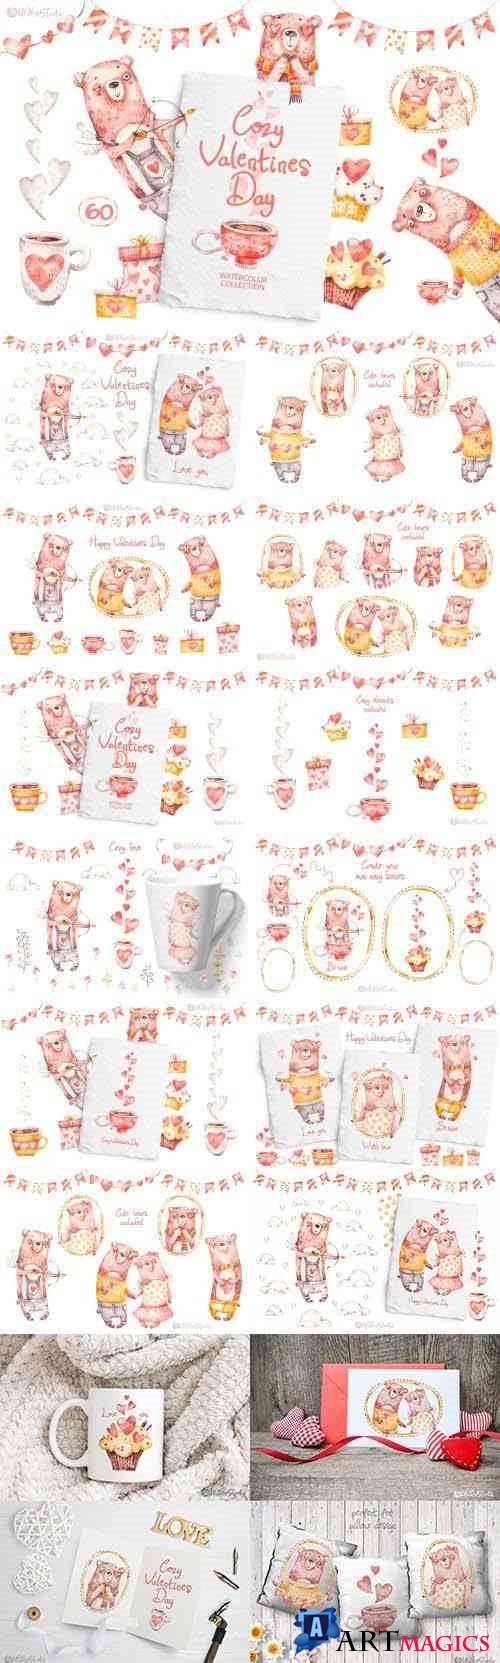 Cozy Valentines Day. Lovely bears watercolor collection - 411510